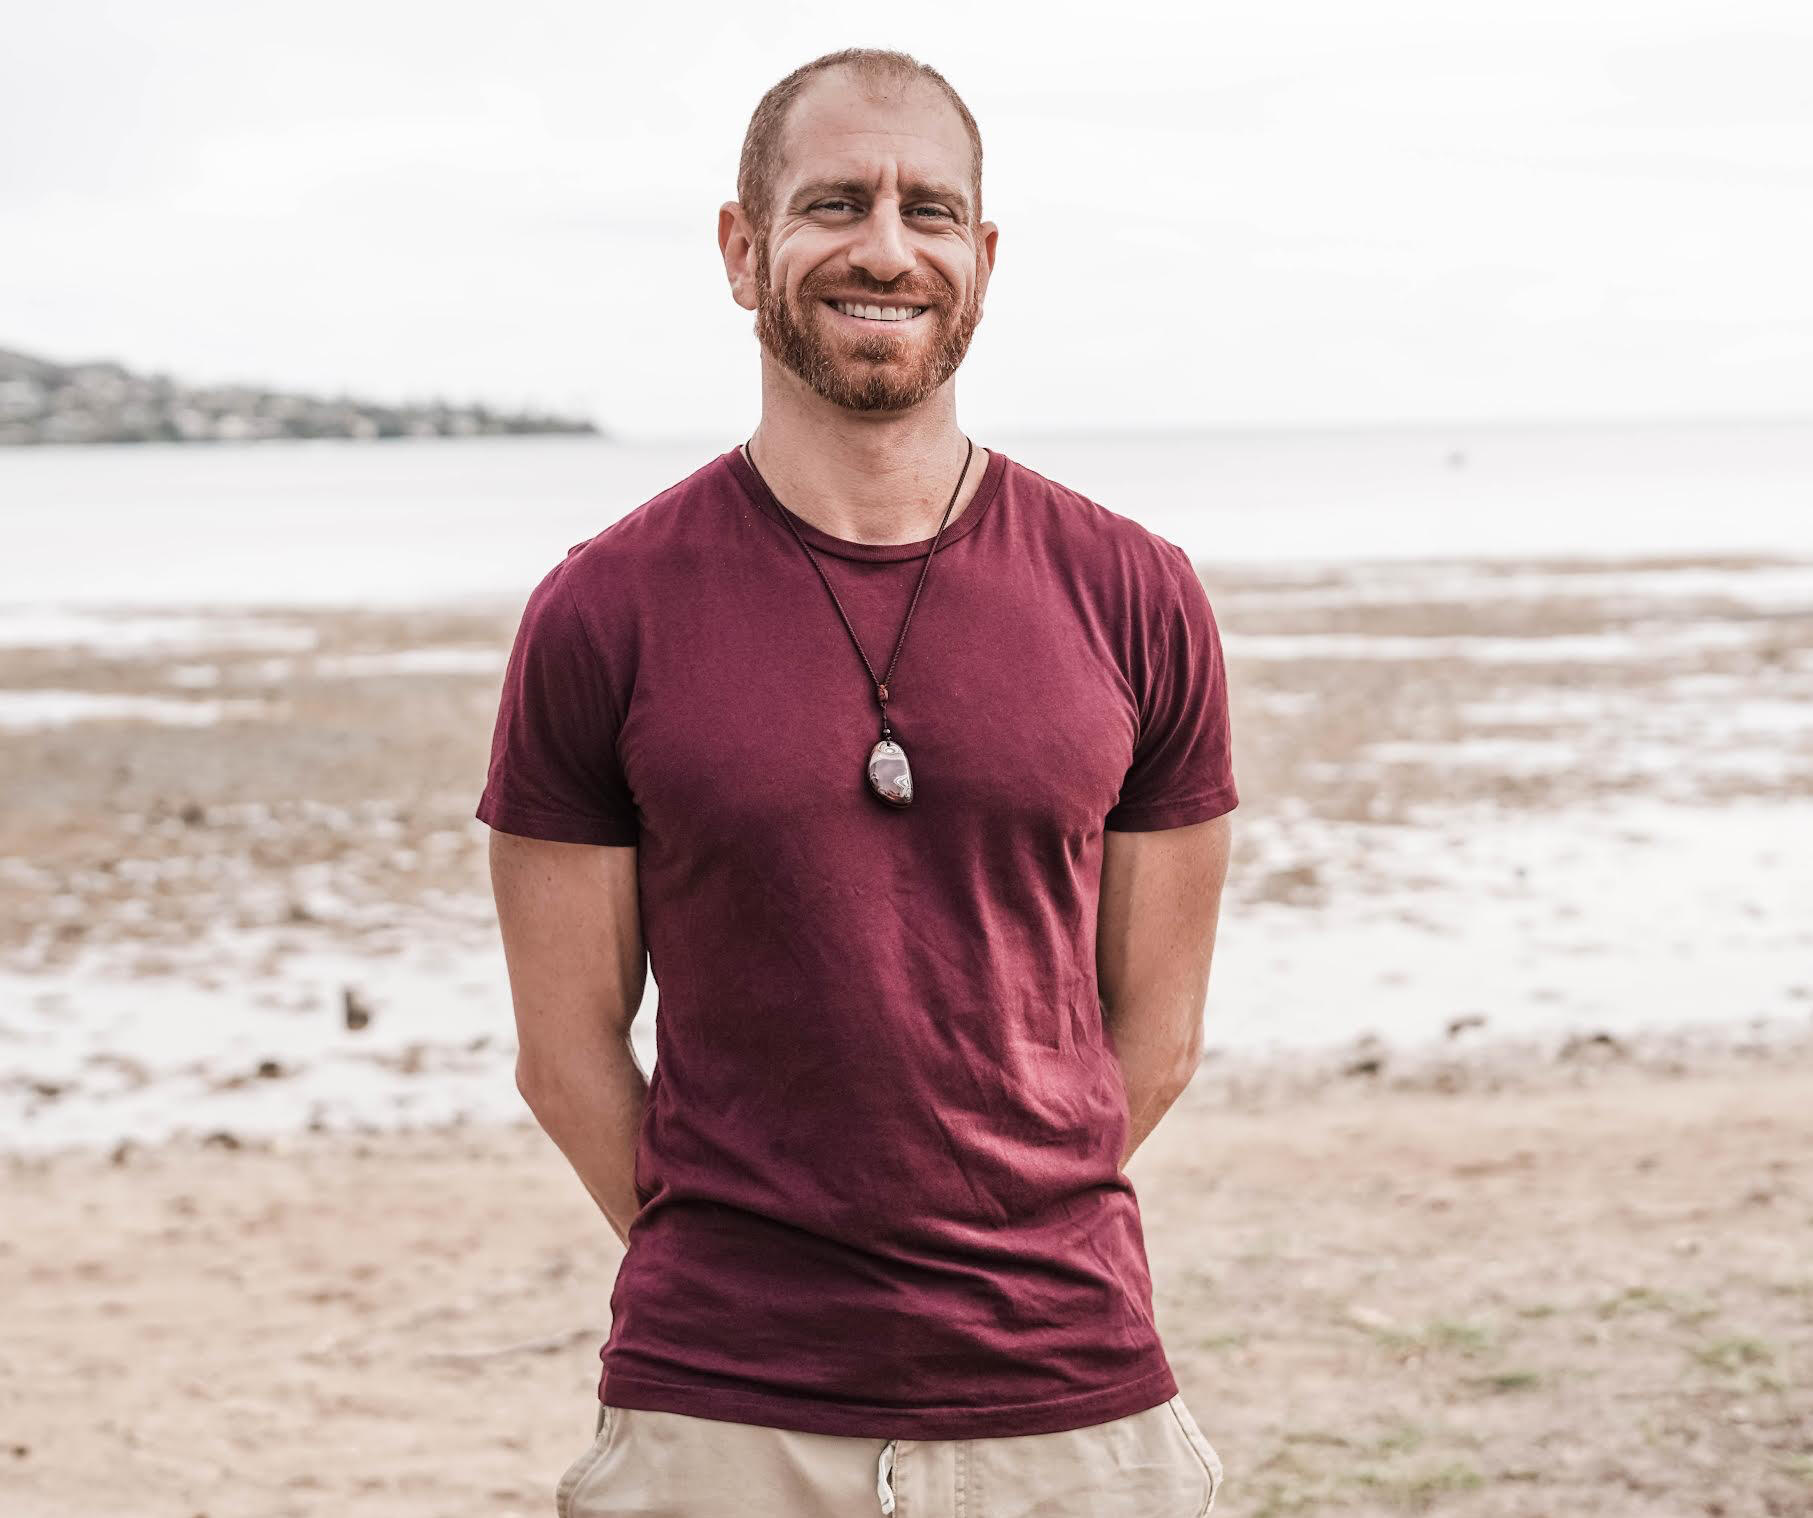 Image of Jay from Mokulua Massage standing in front of the ocean happy and confident.